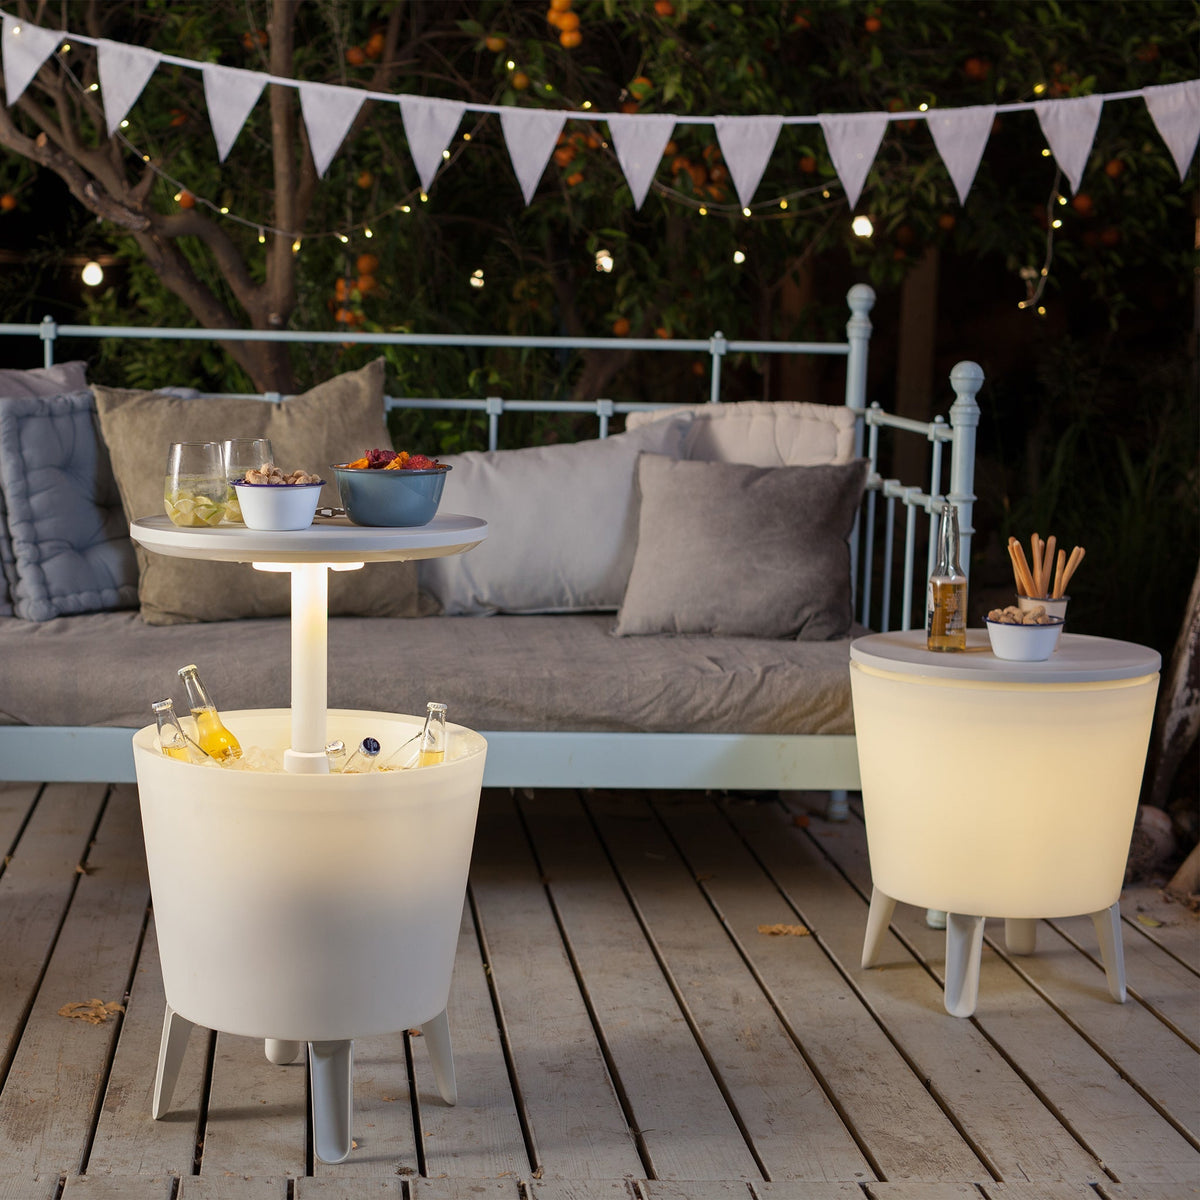 Garden White Cool Bar with Lights